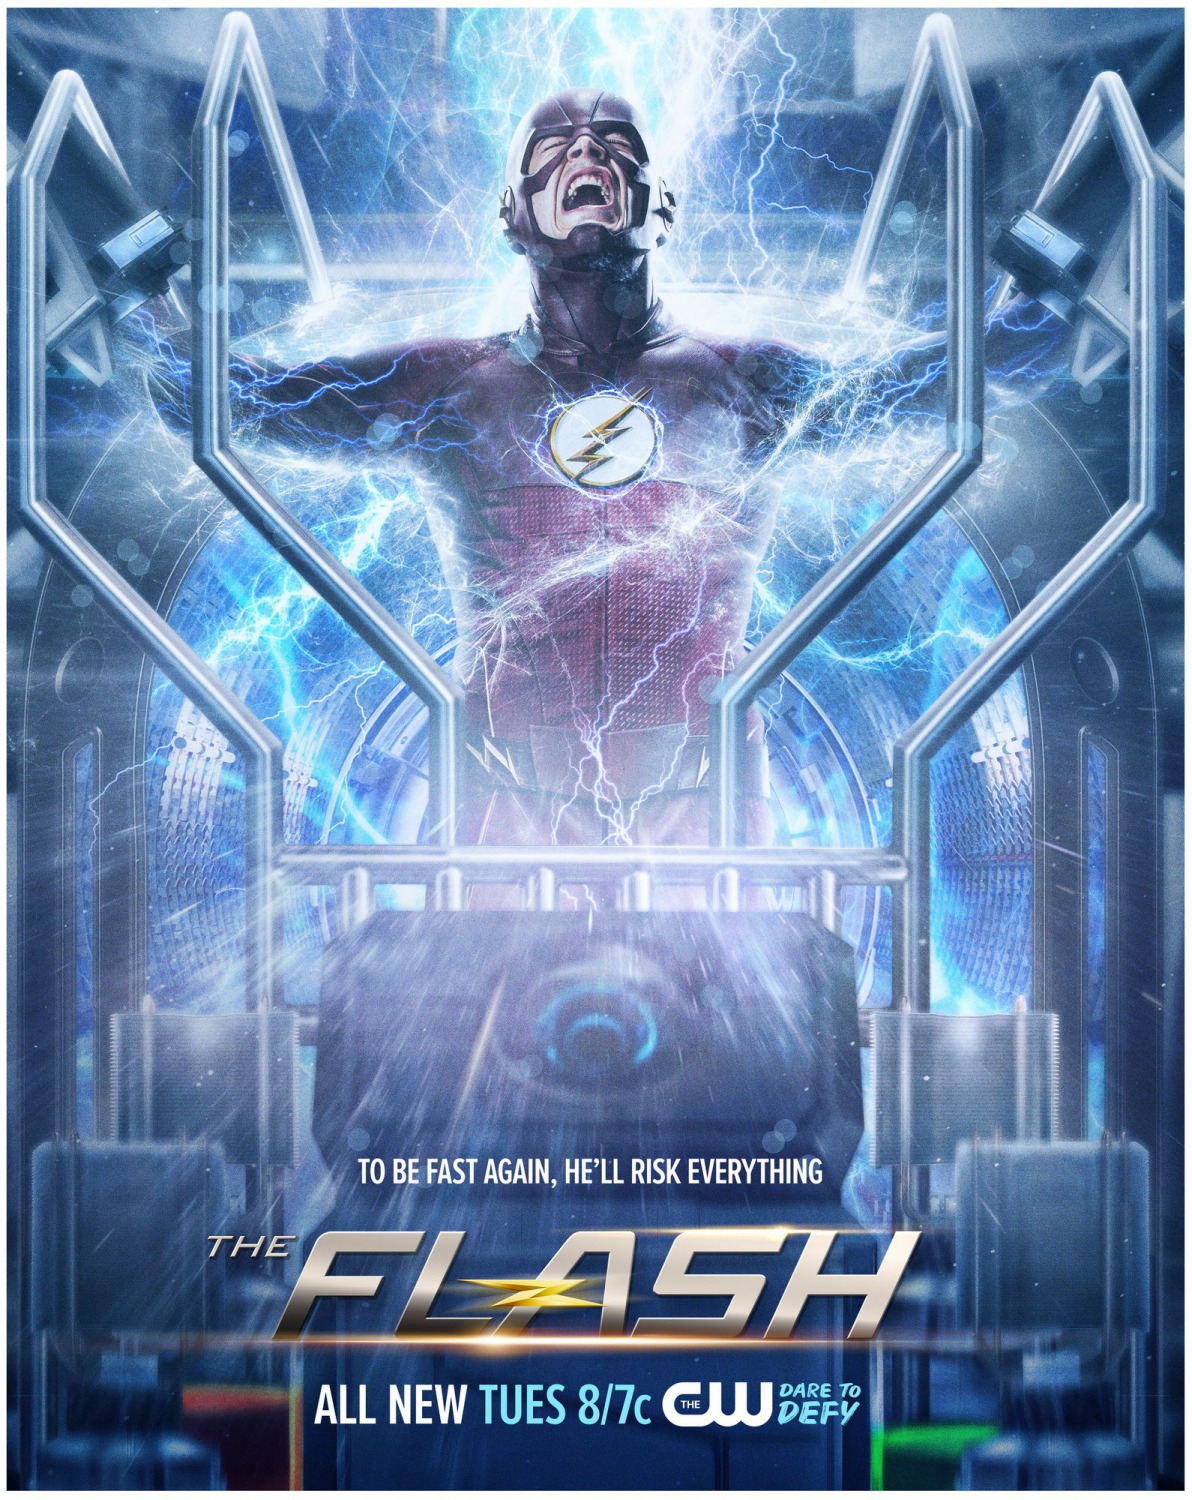 Extra Large Movie Poster Image for The Flash (#13 of 54)